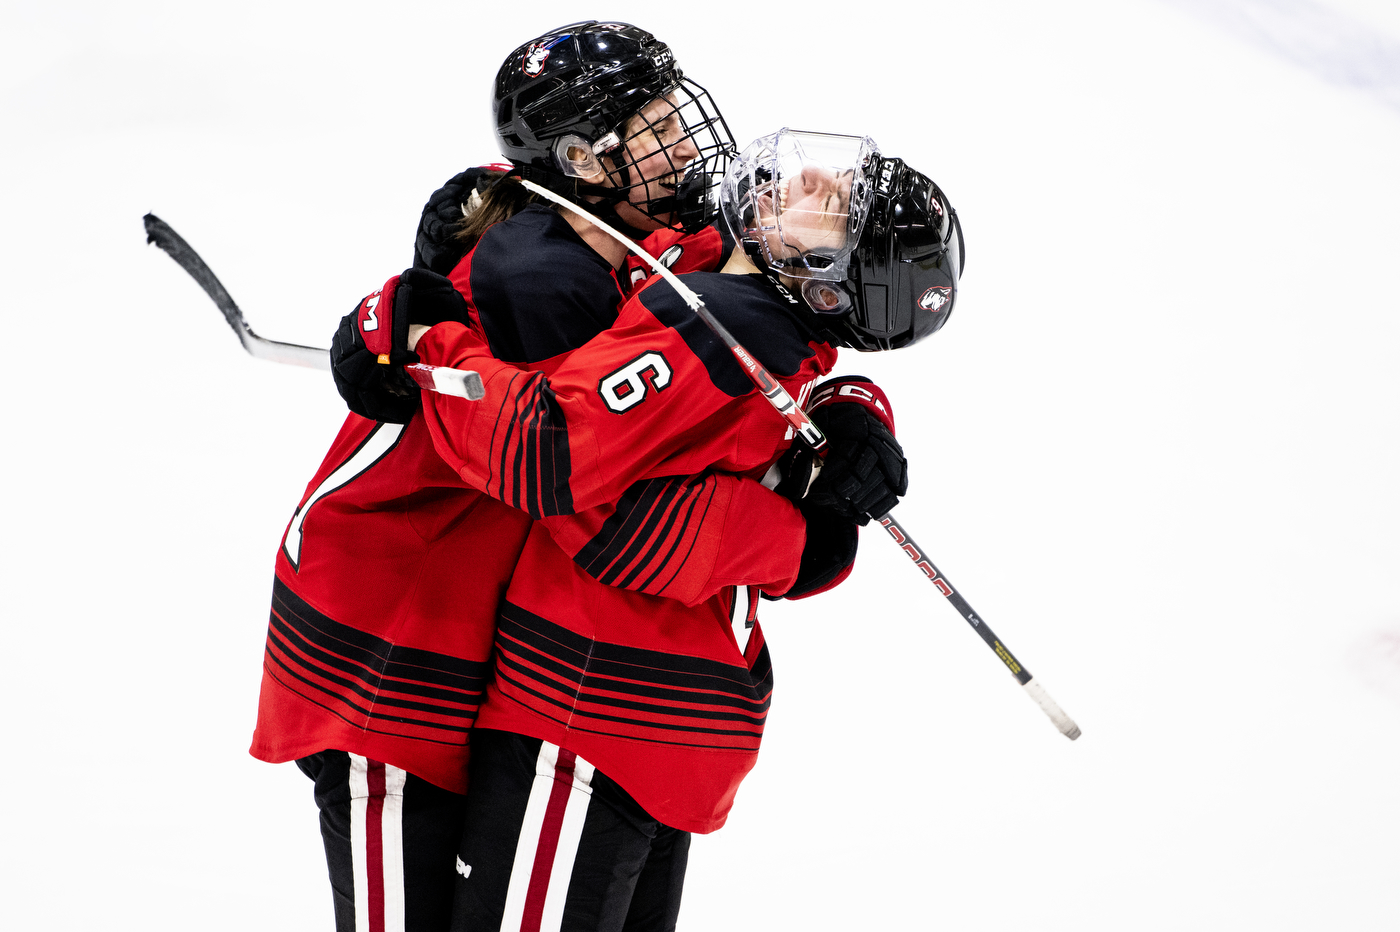 Two Northeastern hockey players hug each other on an ice rink after winning the Women's Beanpot Semifinal at Harvard.